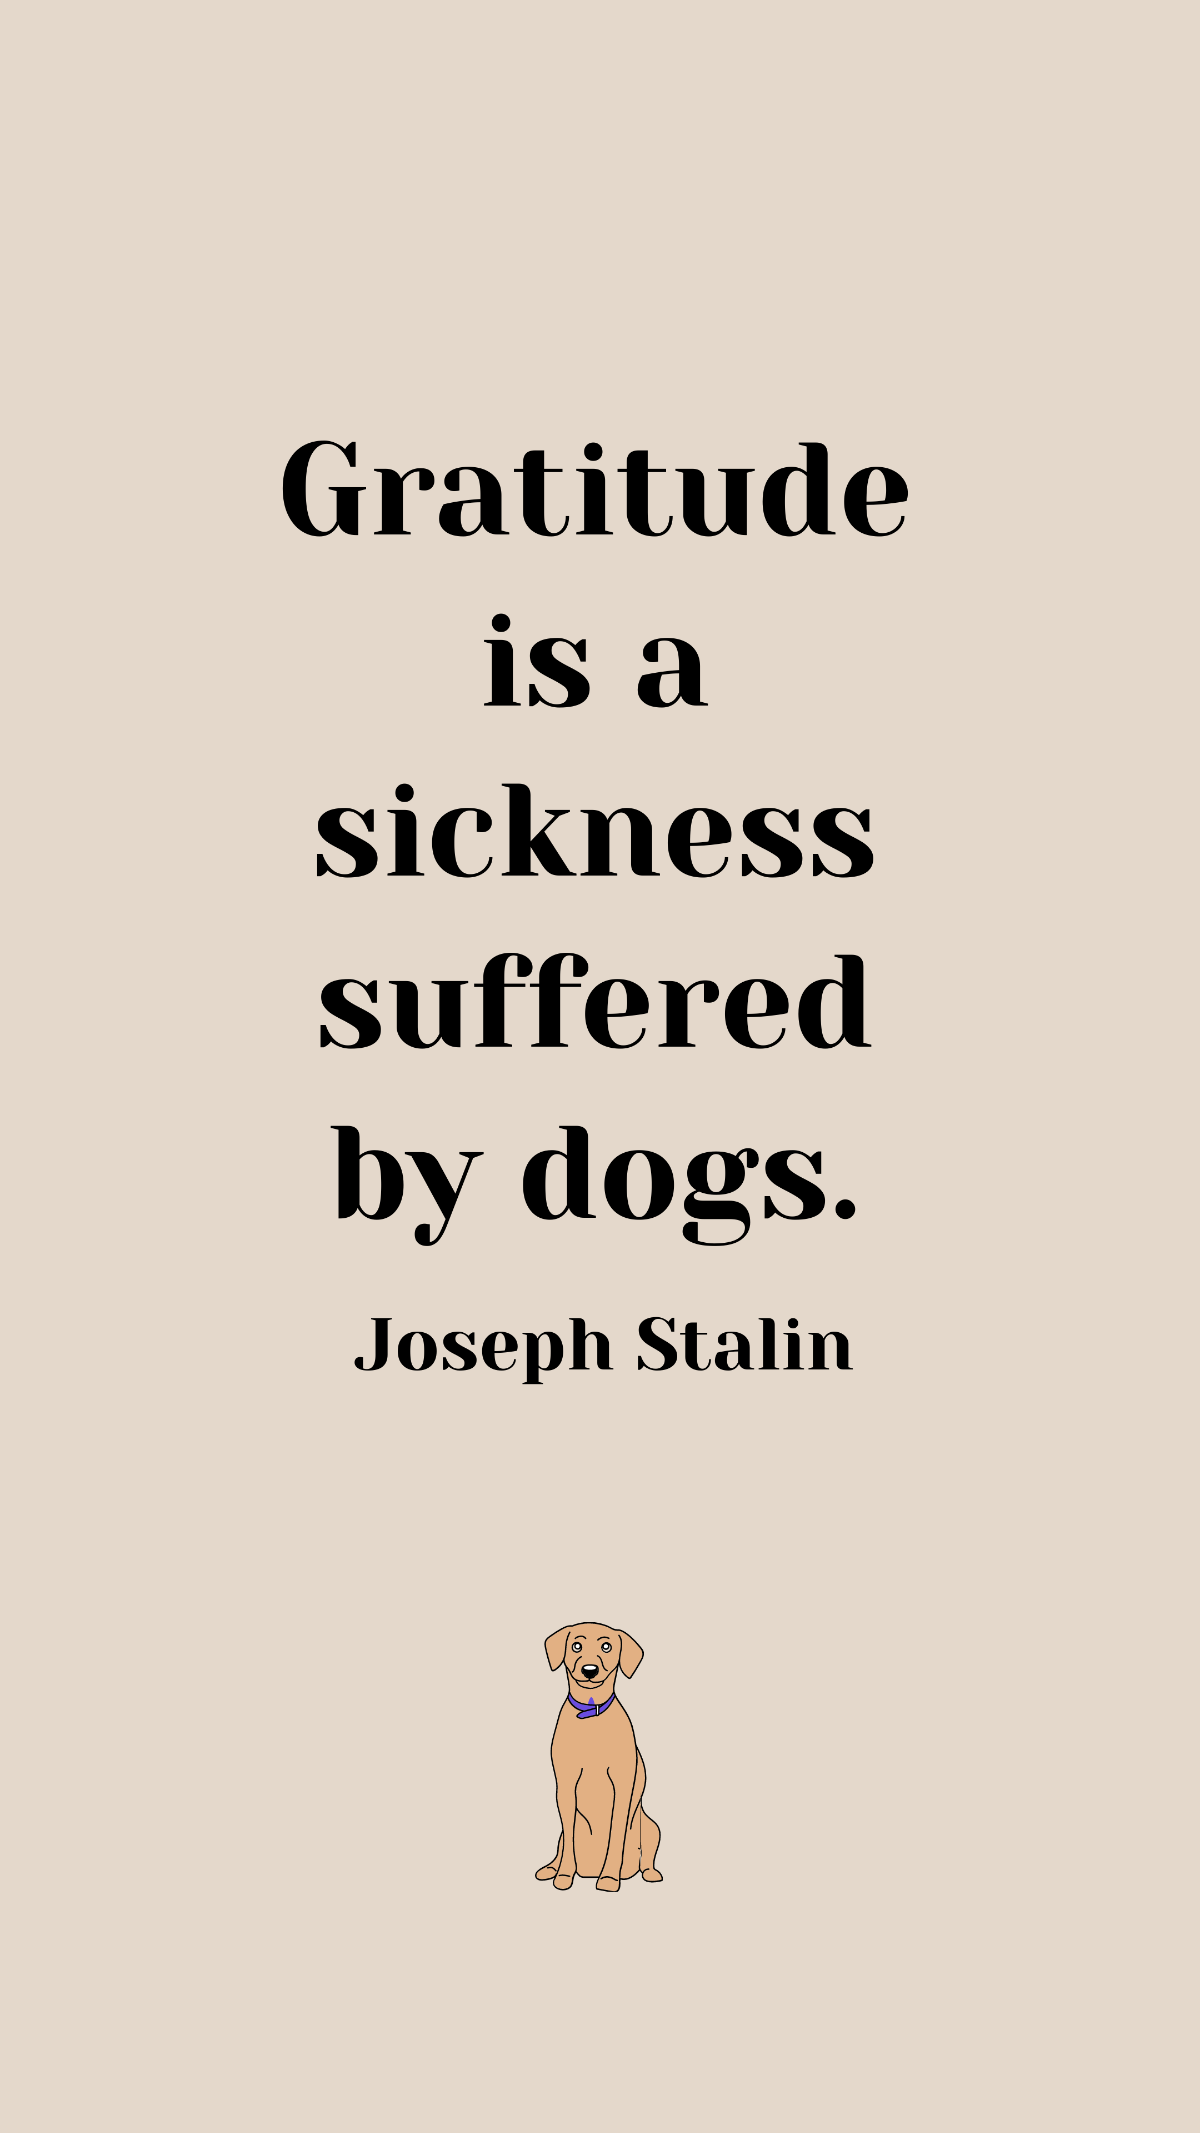 Free Joseph Stalin - Gratitude is a sickness suffered by dogs. Template